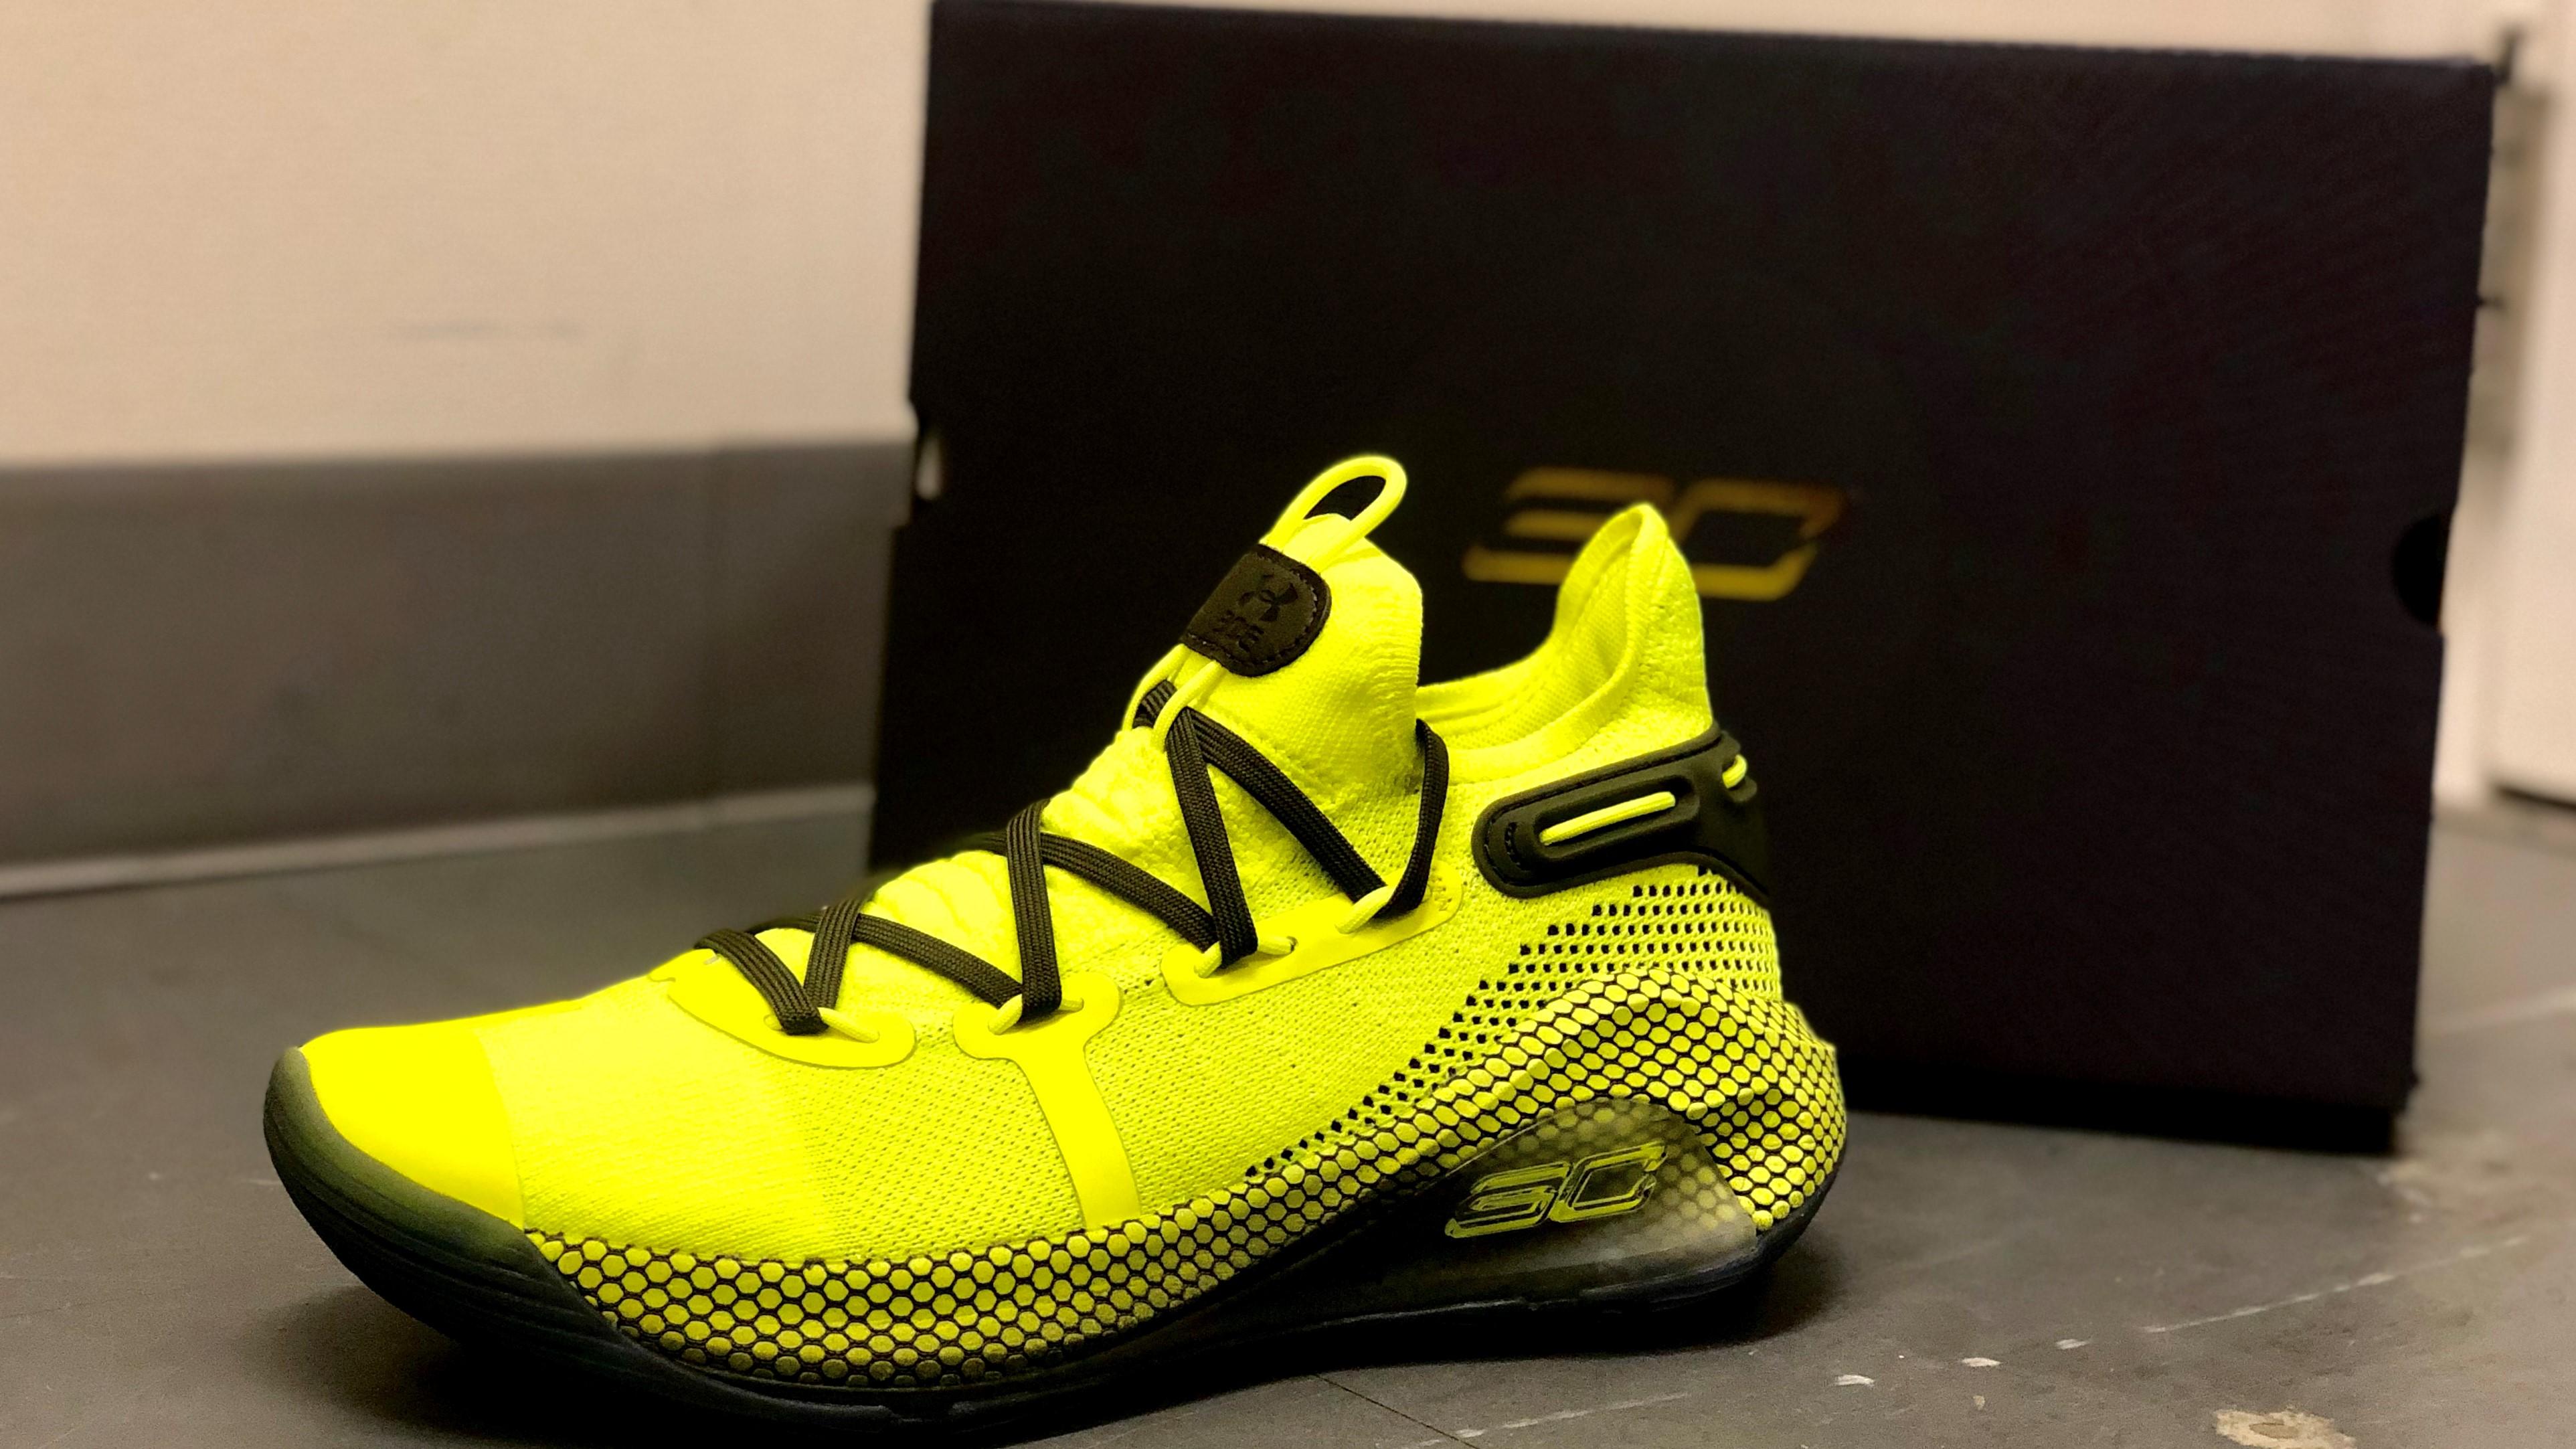 Curry6 COY FISH販売スタート | UNDER ARMOUR BRAND HOUSE 名古屋栄 